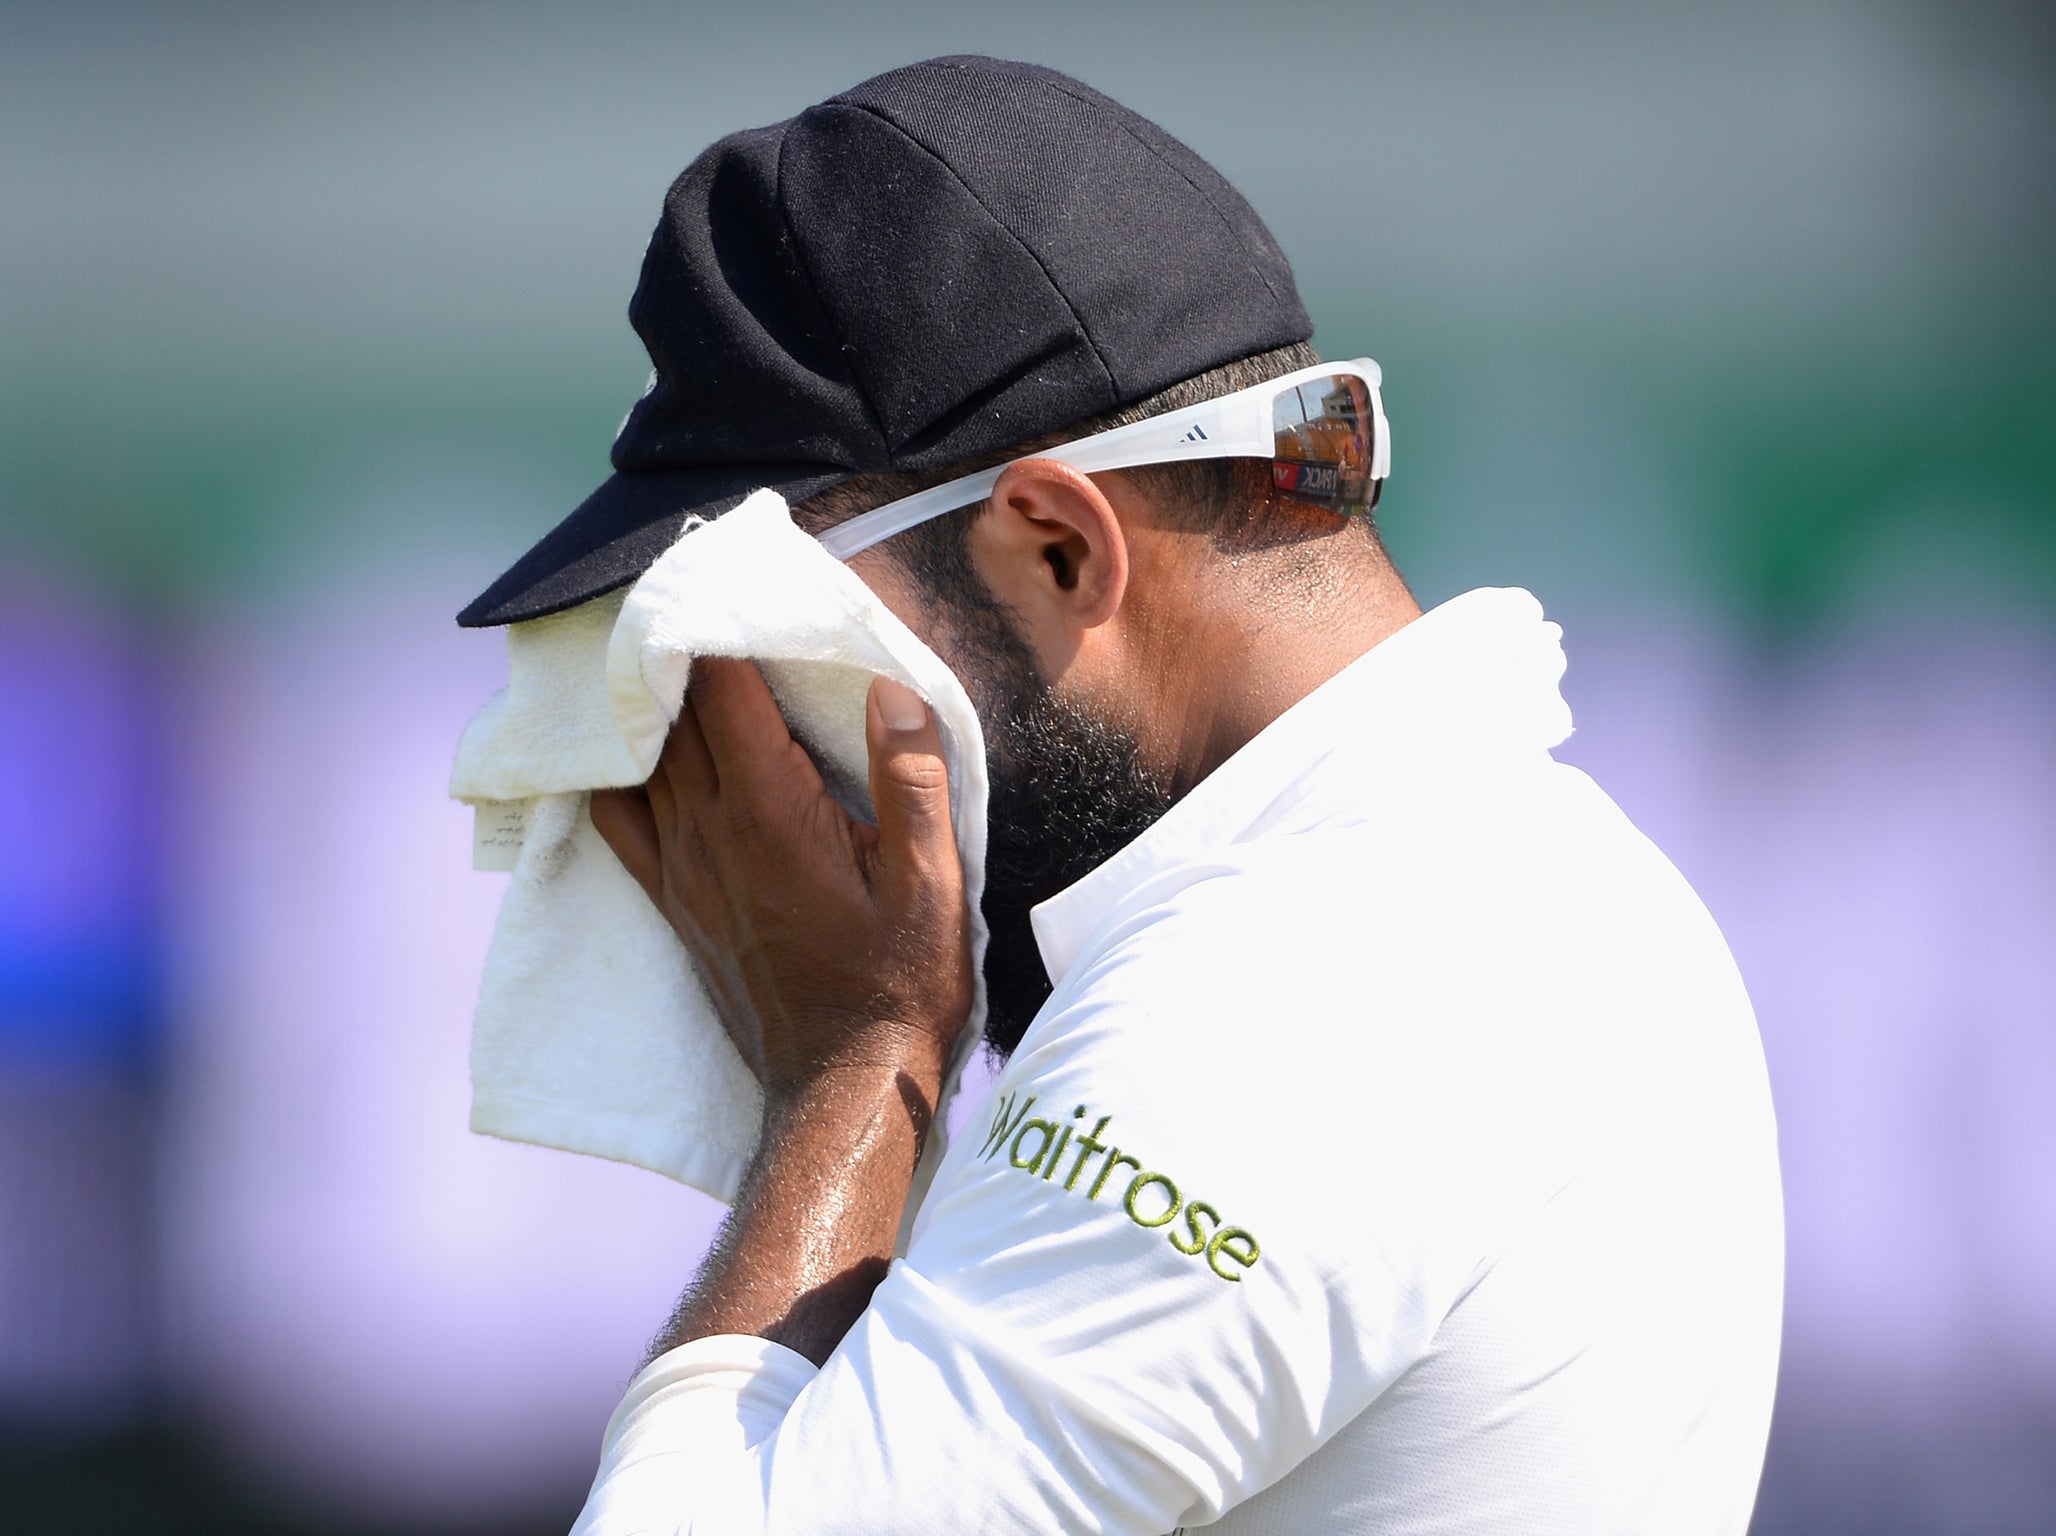 Adil Rashid will only play white-ball cricket for Yorkshire during the 2018 season